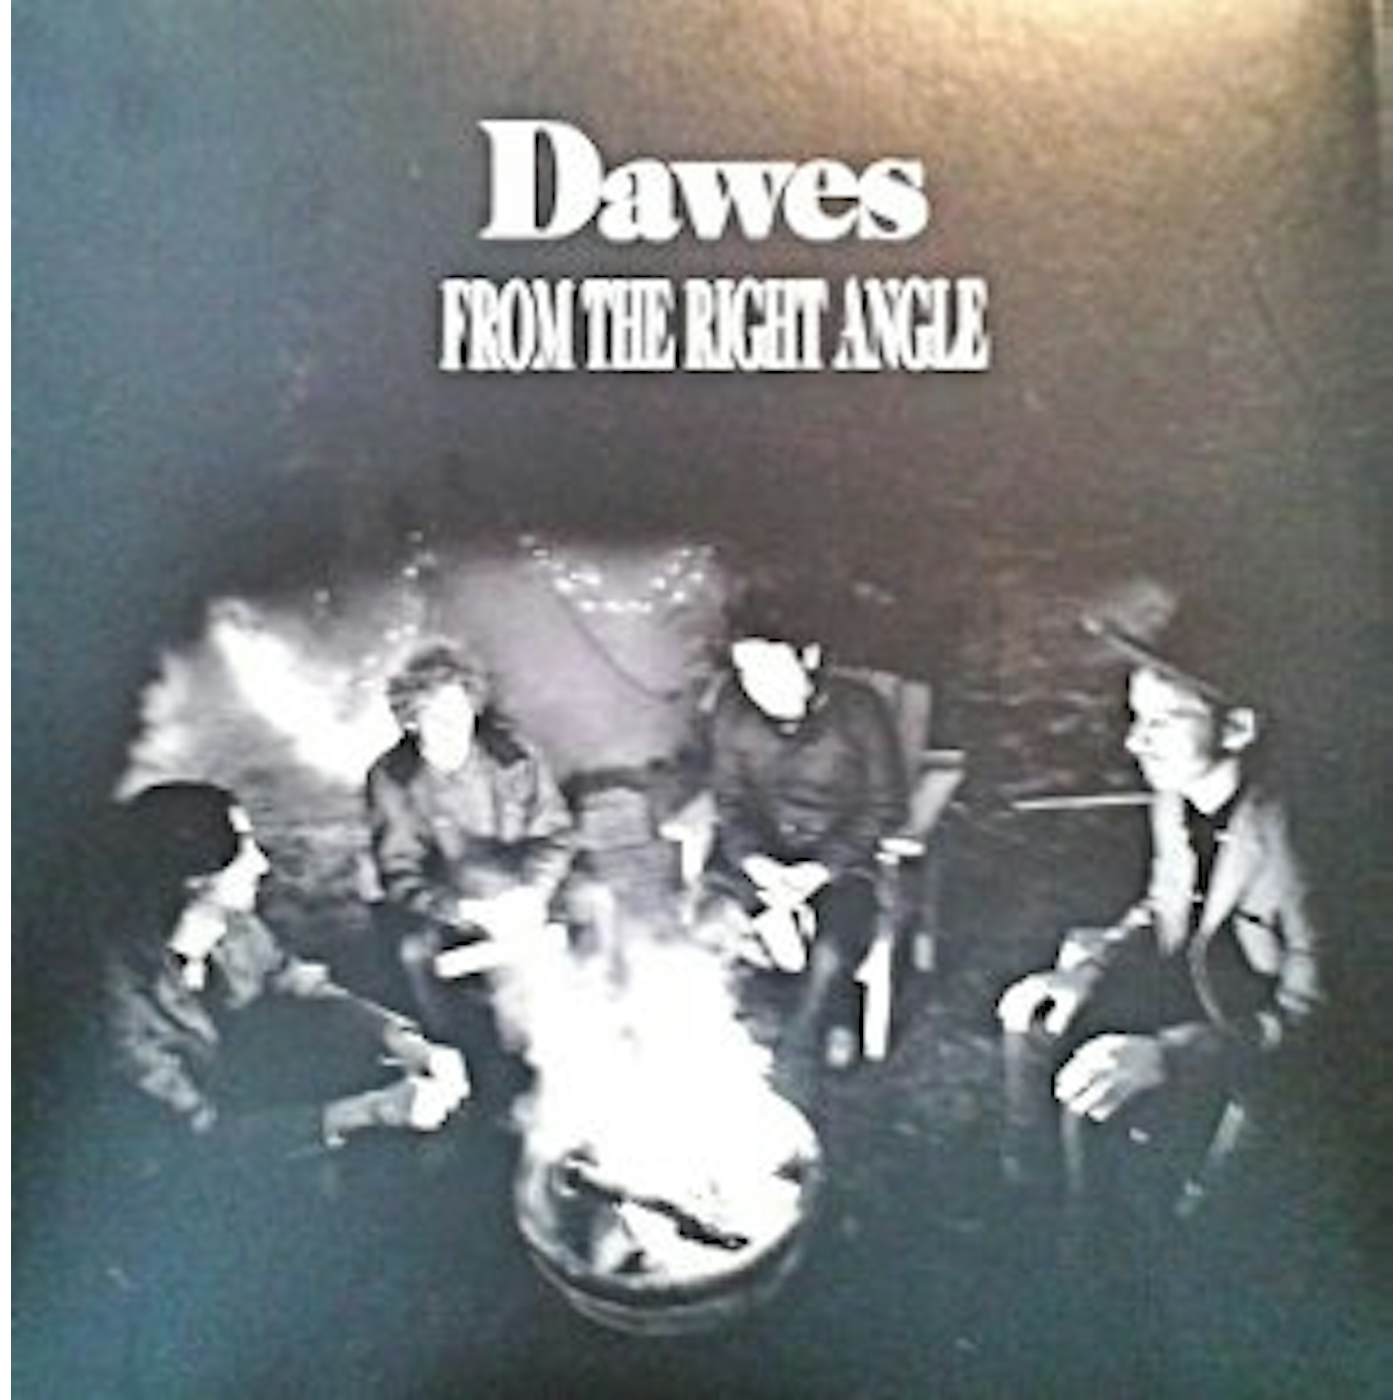 Dawes FROM THE RIGHT ANGLE Vinyl Record